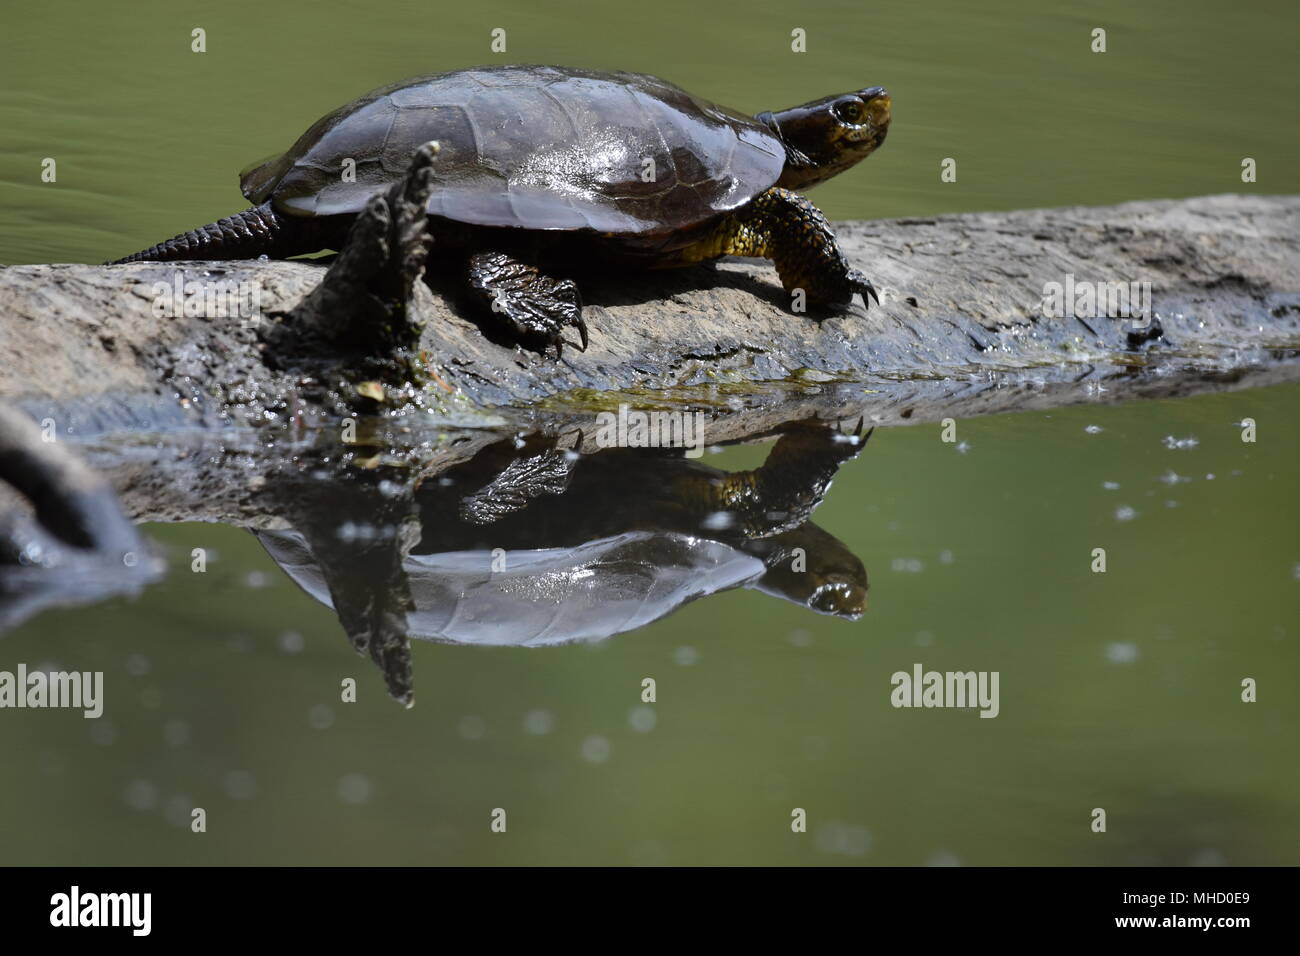 A Western Pond Turtle sun bathing on a log in Jewel Lake, Tilden Park, SF Bay Area, CA. Stock Photo